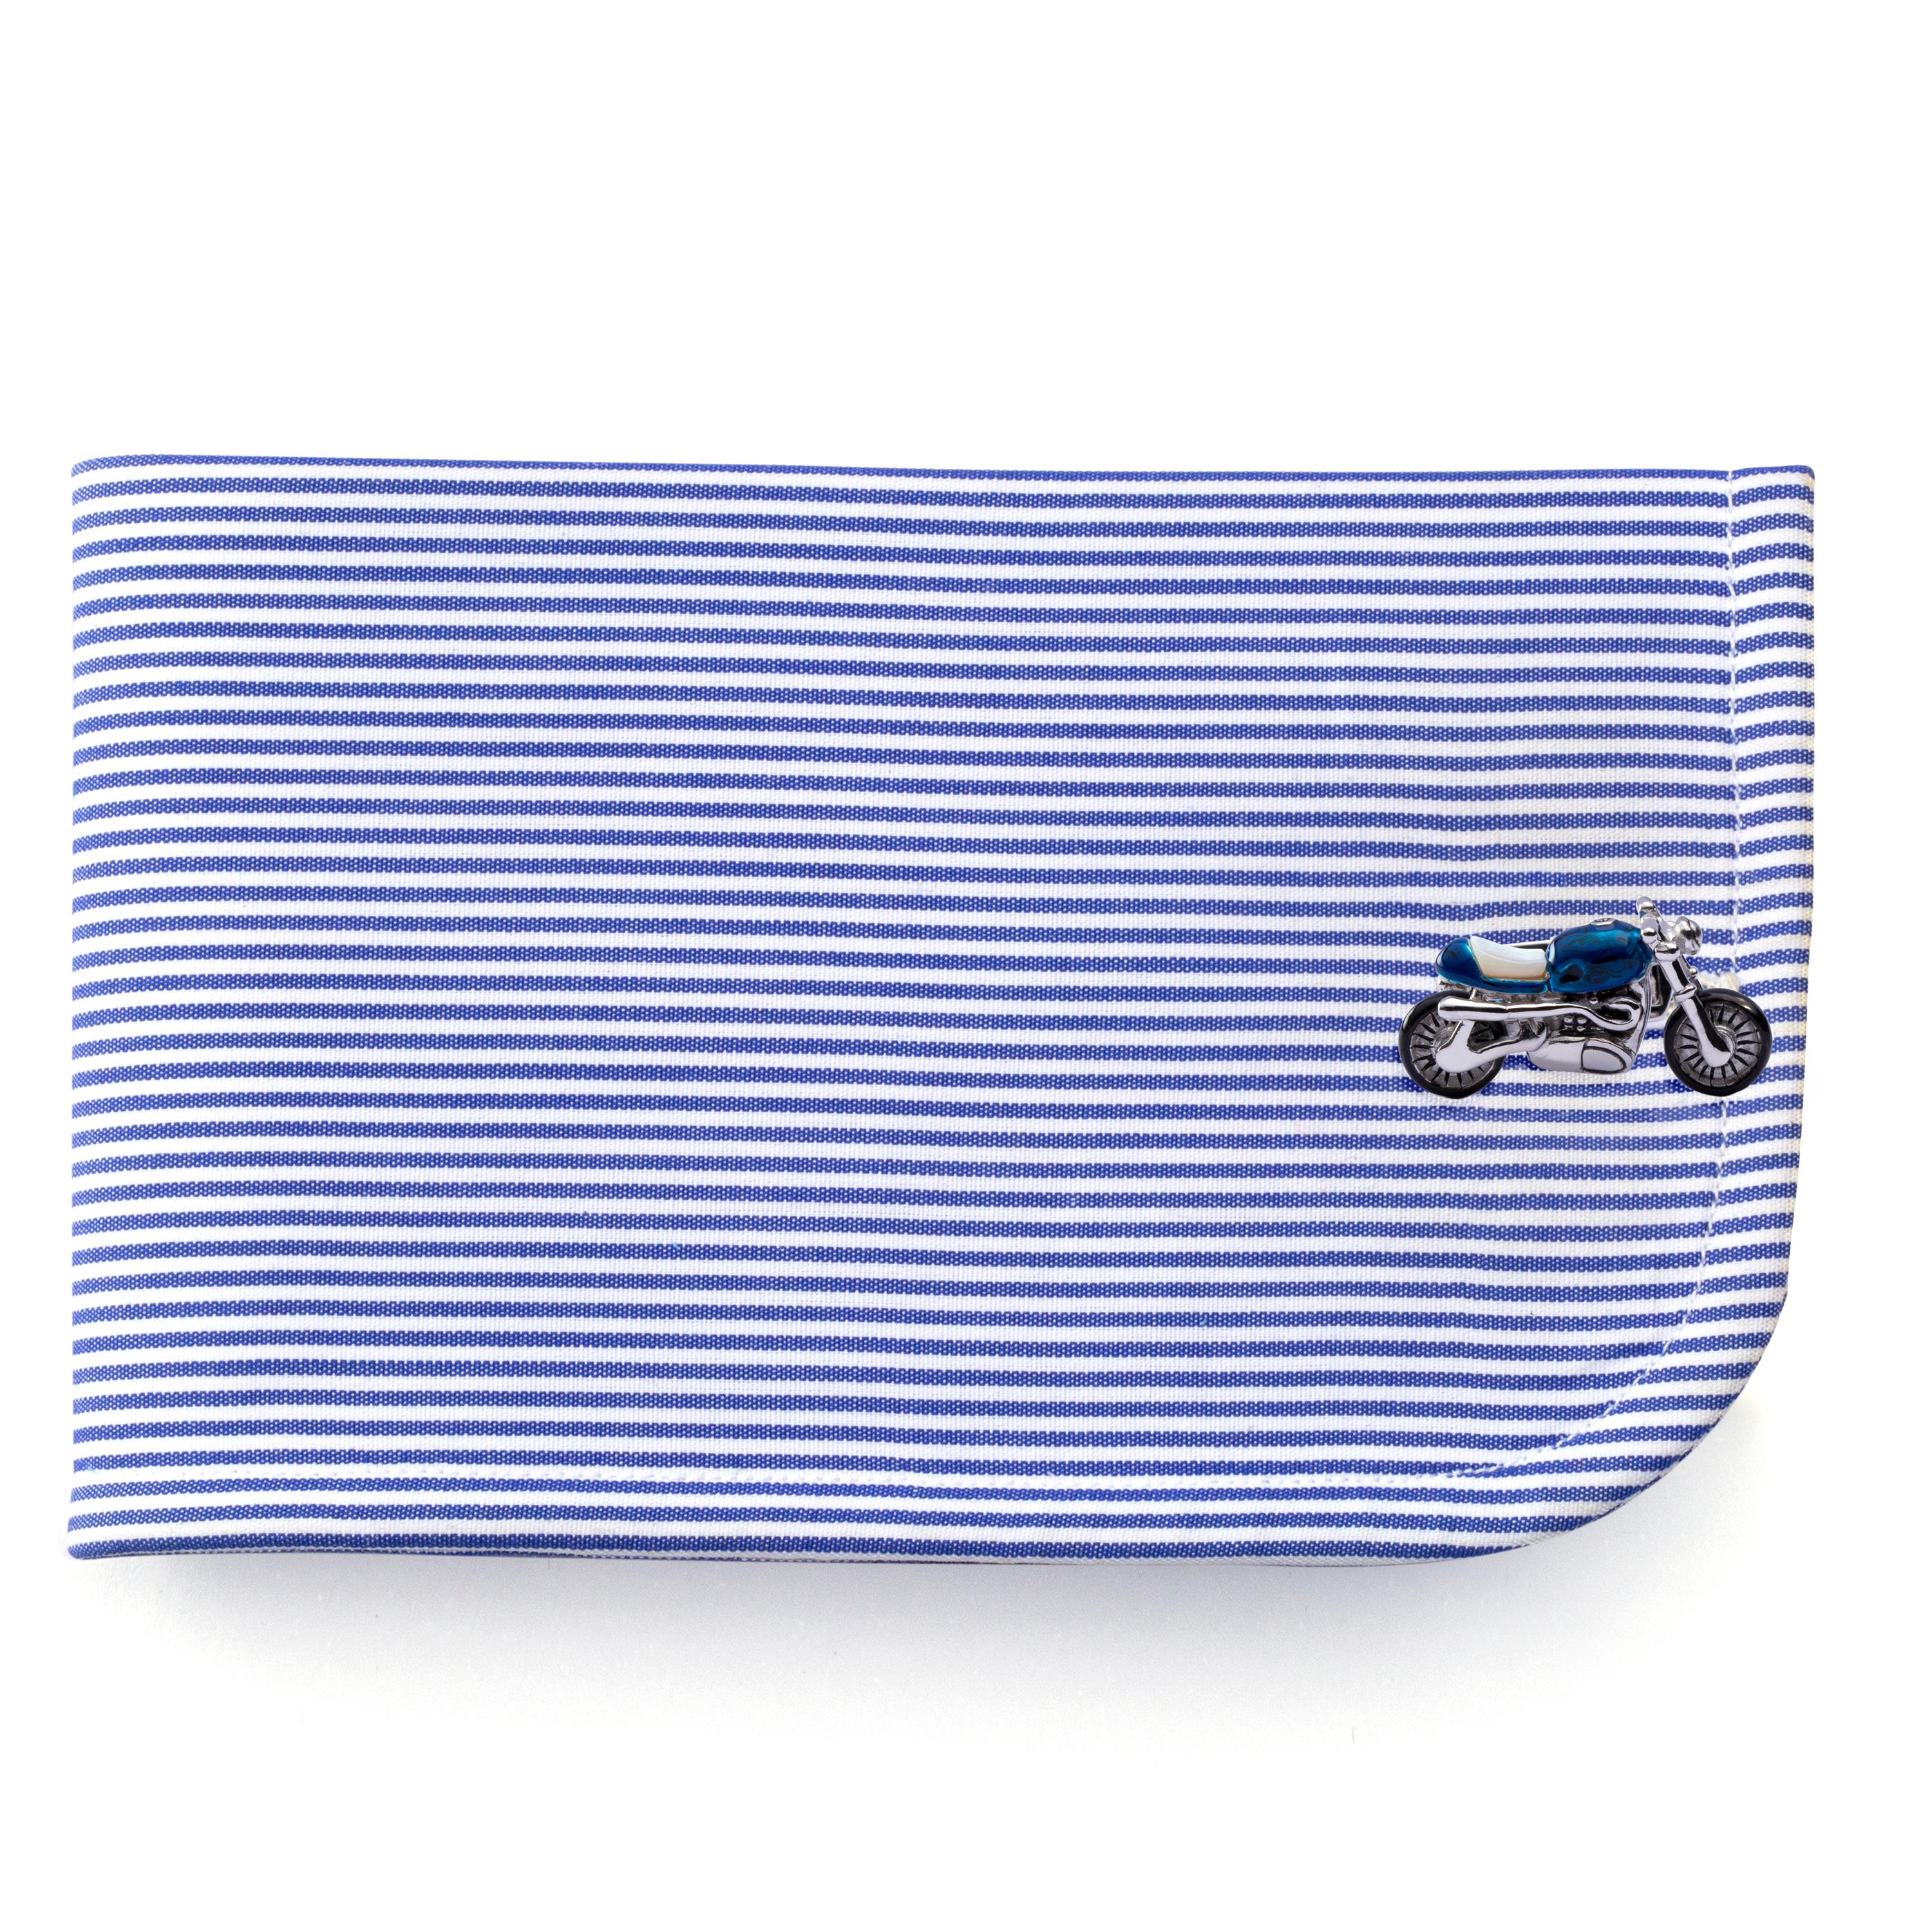 Alex Jona design collection, hand crafted in Italy, sterling silver, blue enamel, seat, motorcycle cufflinks.    Dimensions 0.95 in W x 0.52 in H.

Alex Jona cufflinks stand out, not only for their special design and for the excellent quality, but